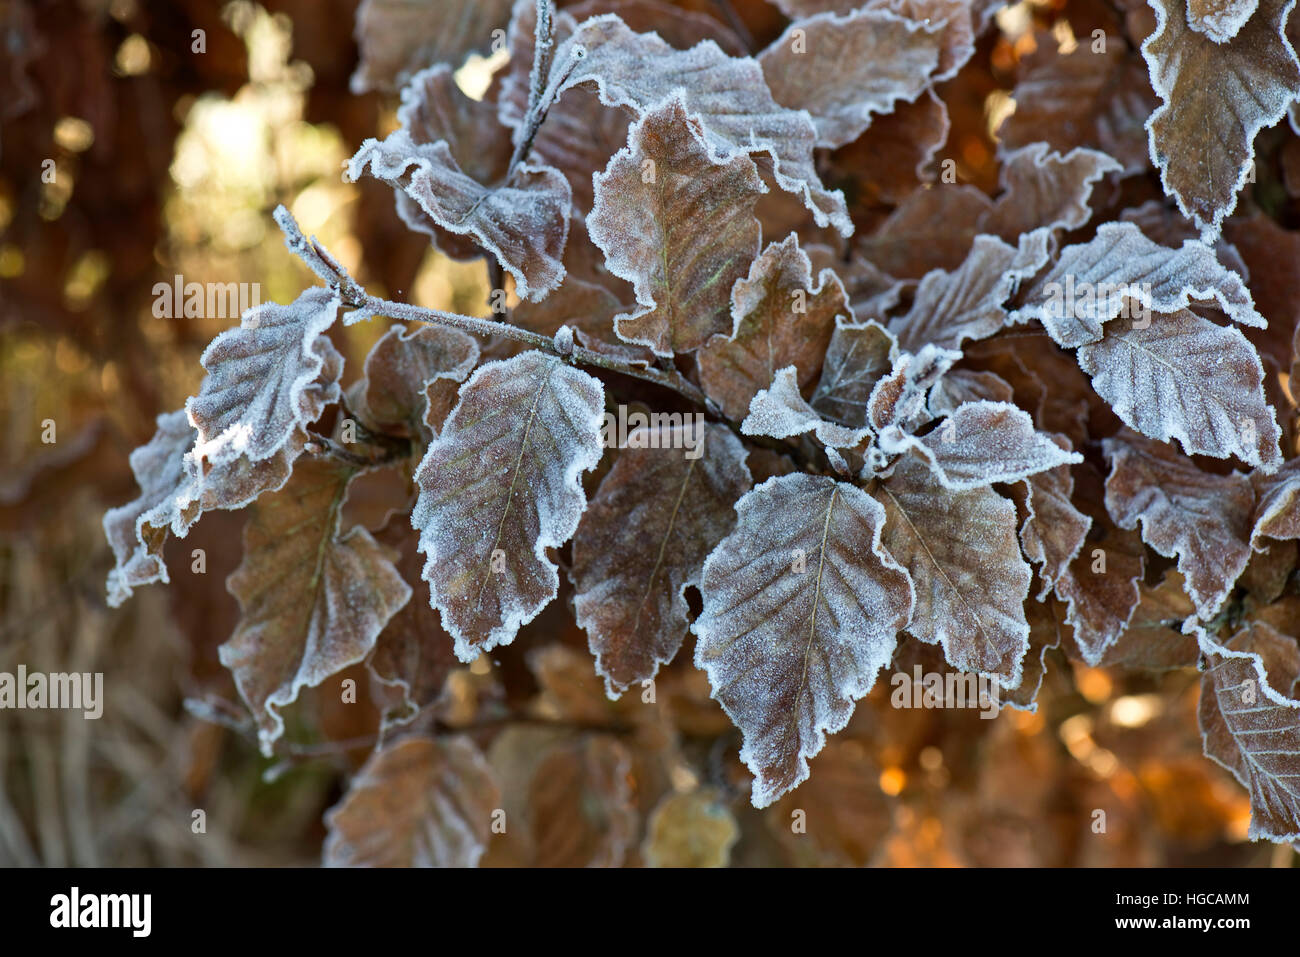 Hard frost on golden brown beech leaves on a cold winter morning in December Stock Photo